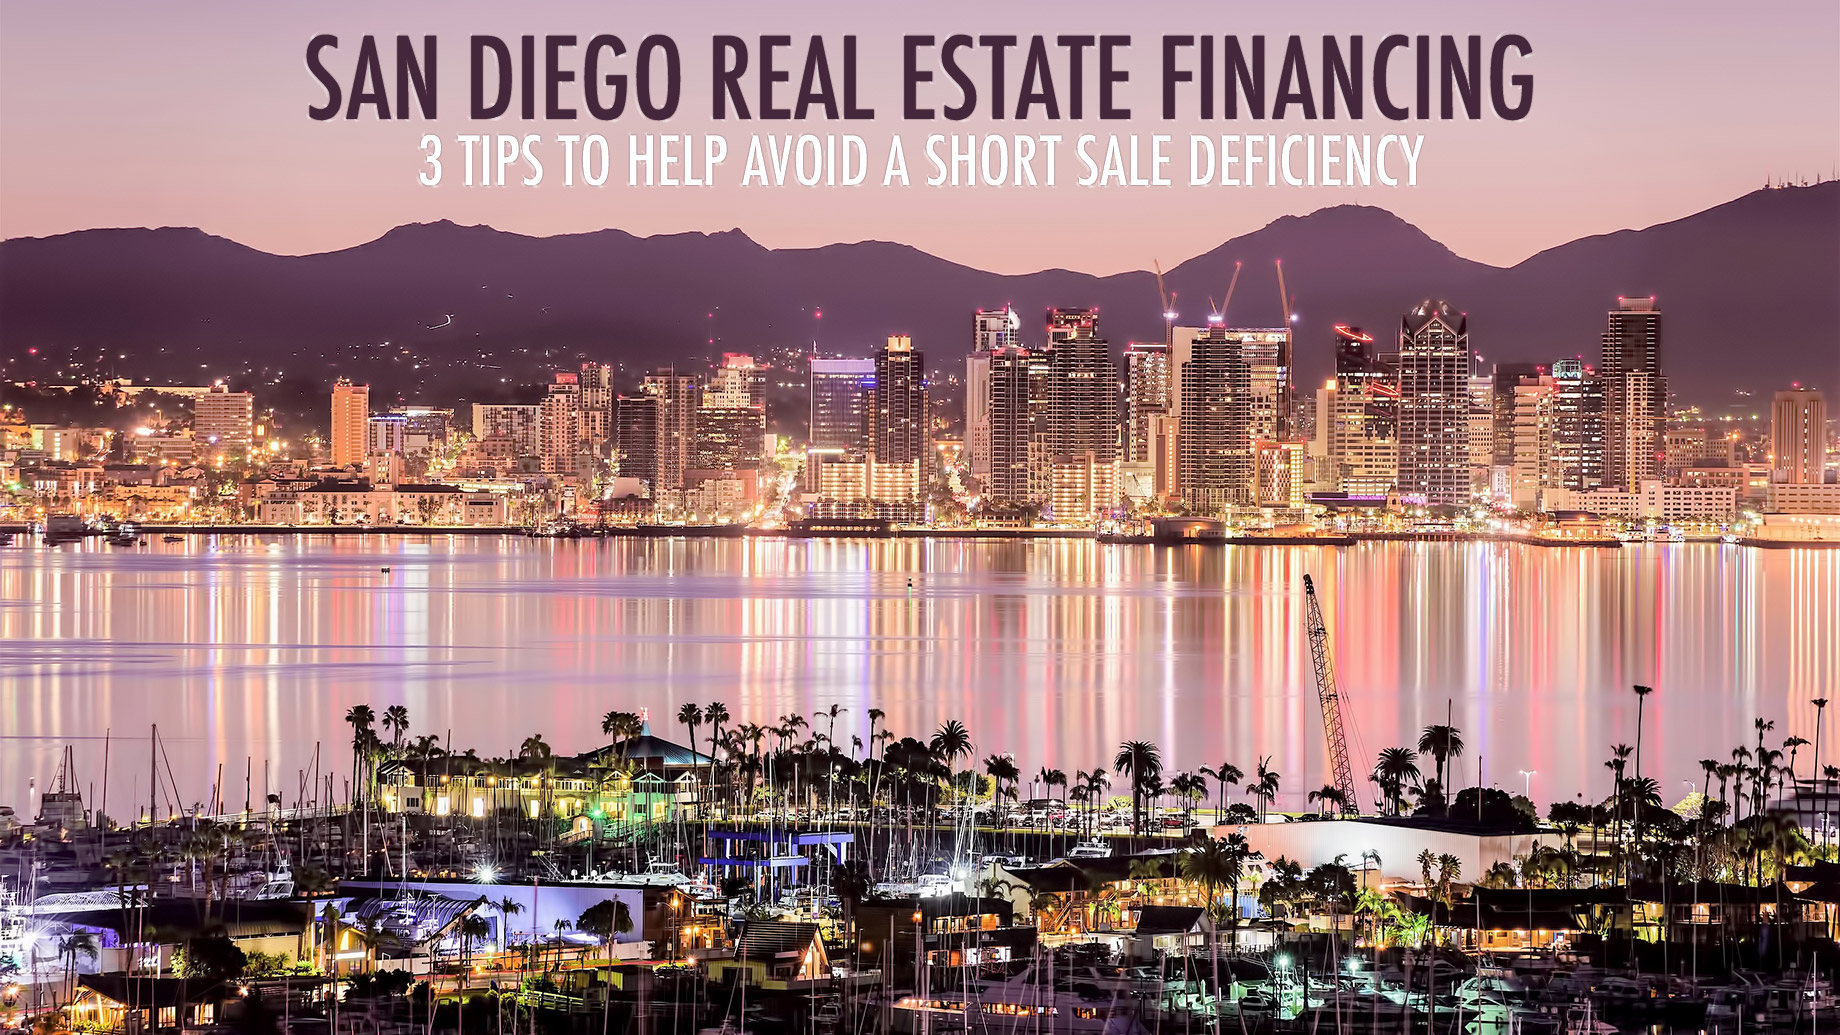 San Diego Real Estate Financing - 3 Tips to Help Avoid a Short Sale Deficiency